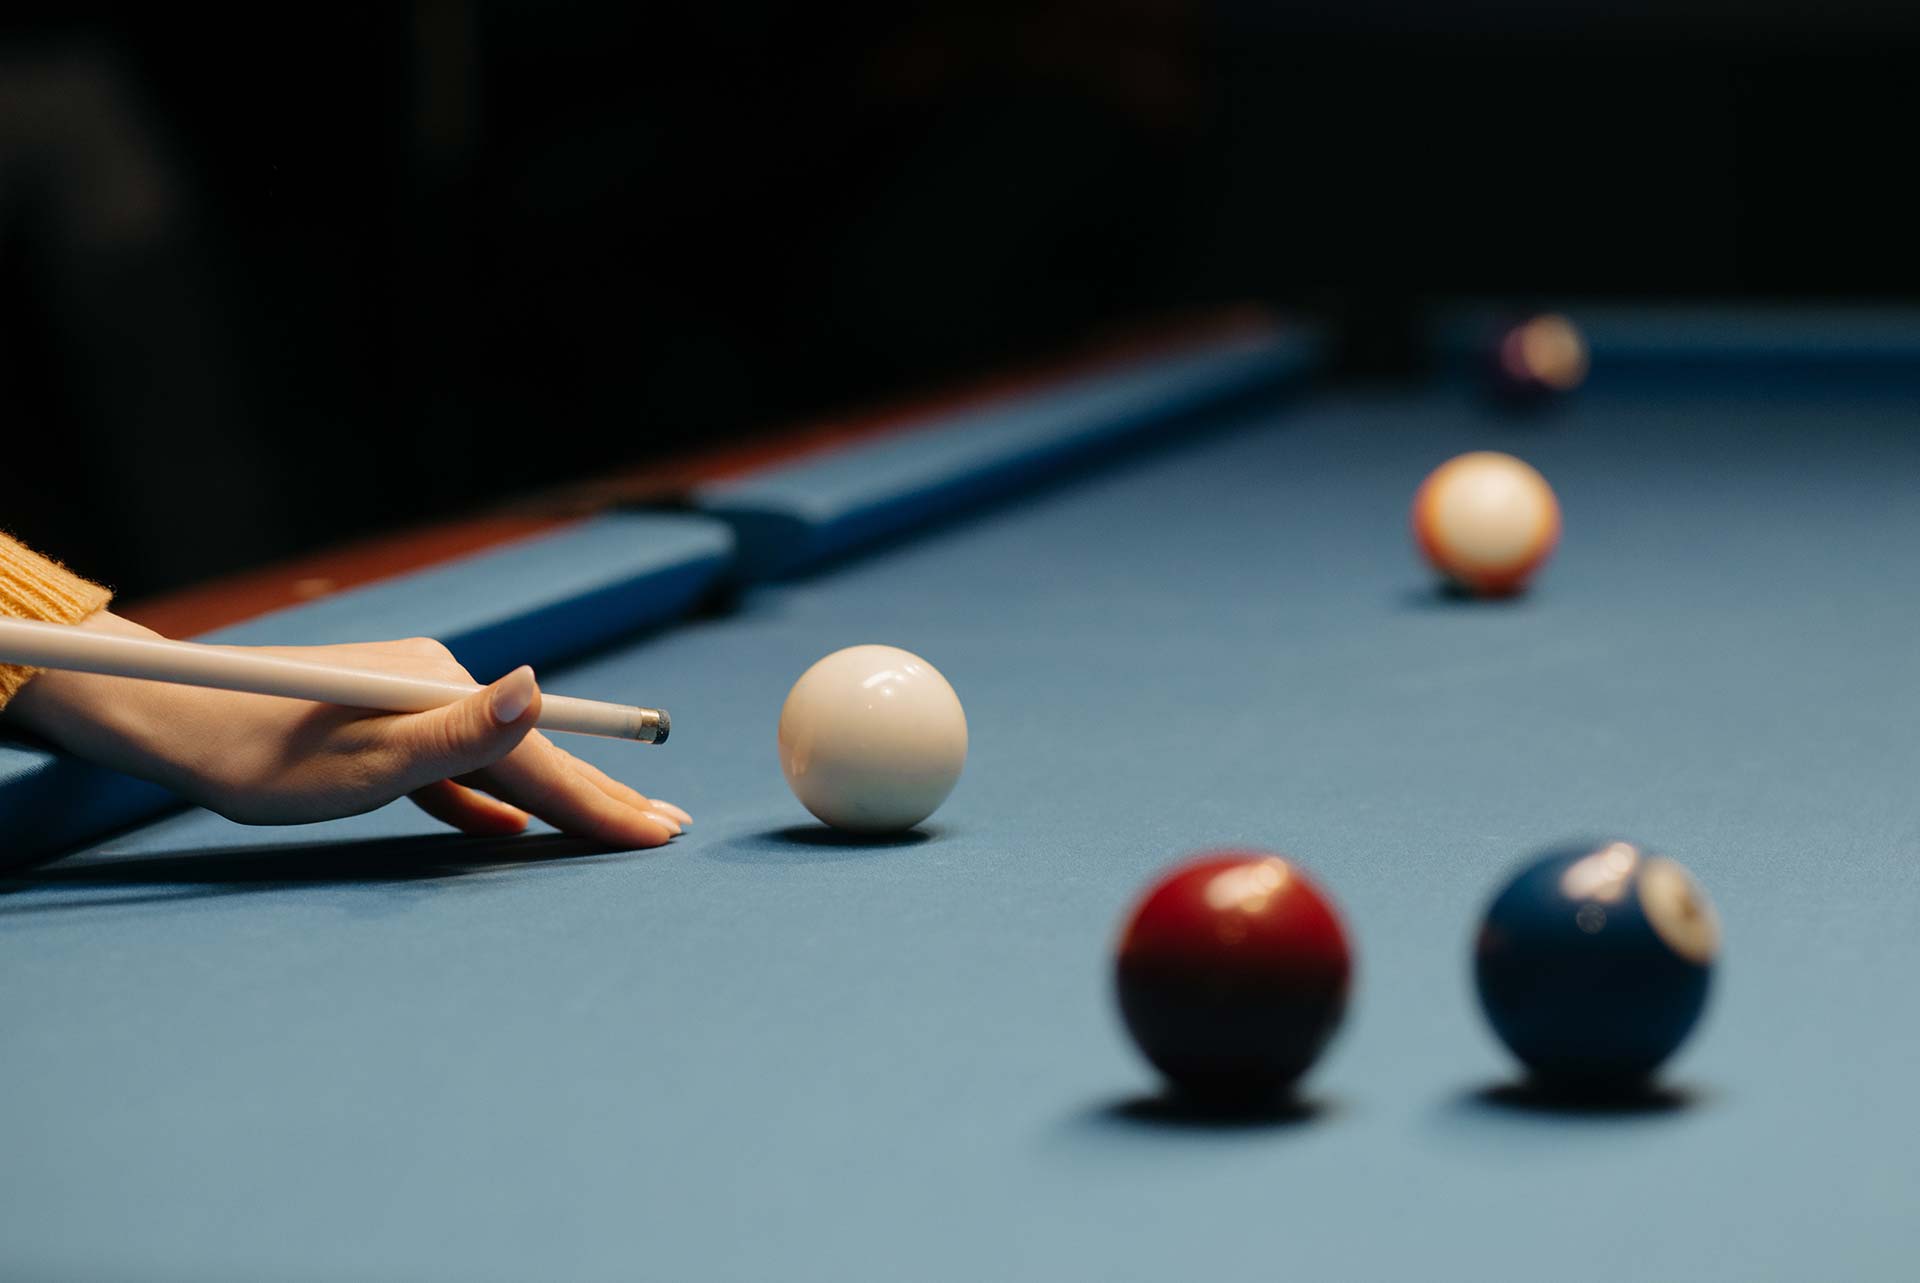 Pool cues, balls and chalk on a pool table